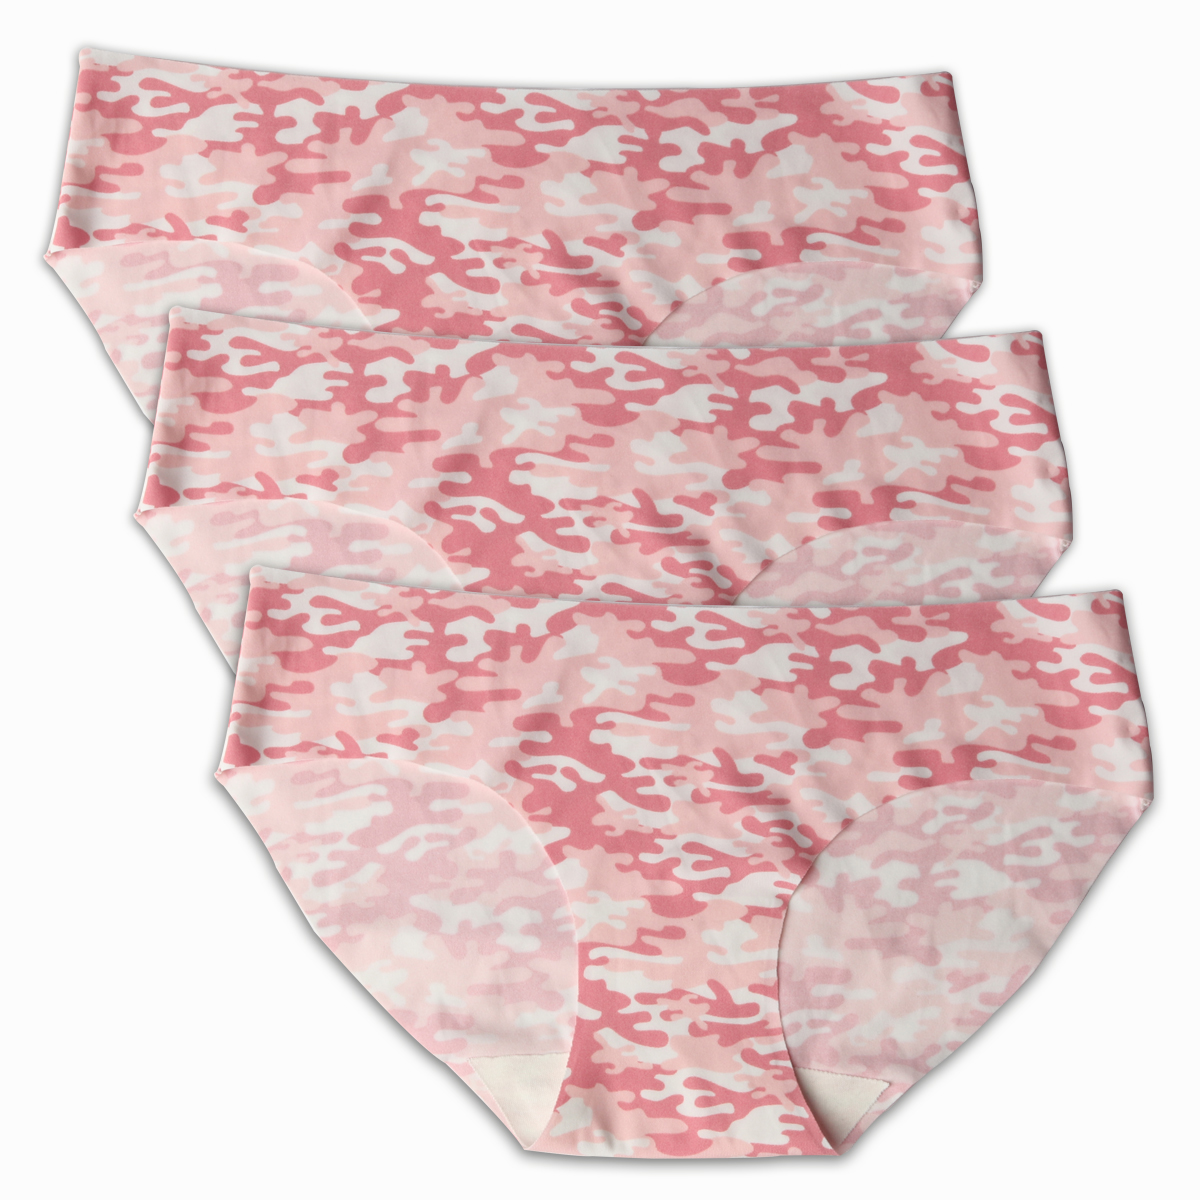 TENA Pink Washable Incontinence Underwear - Hipster